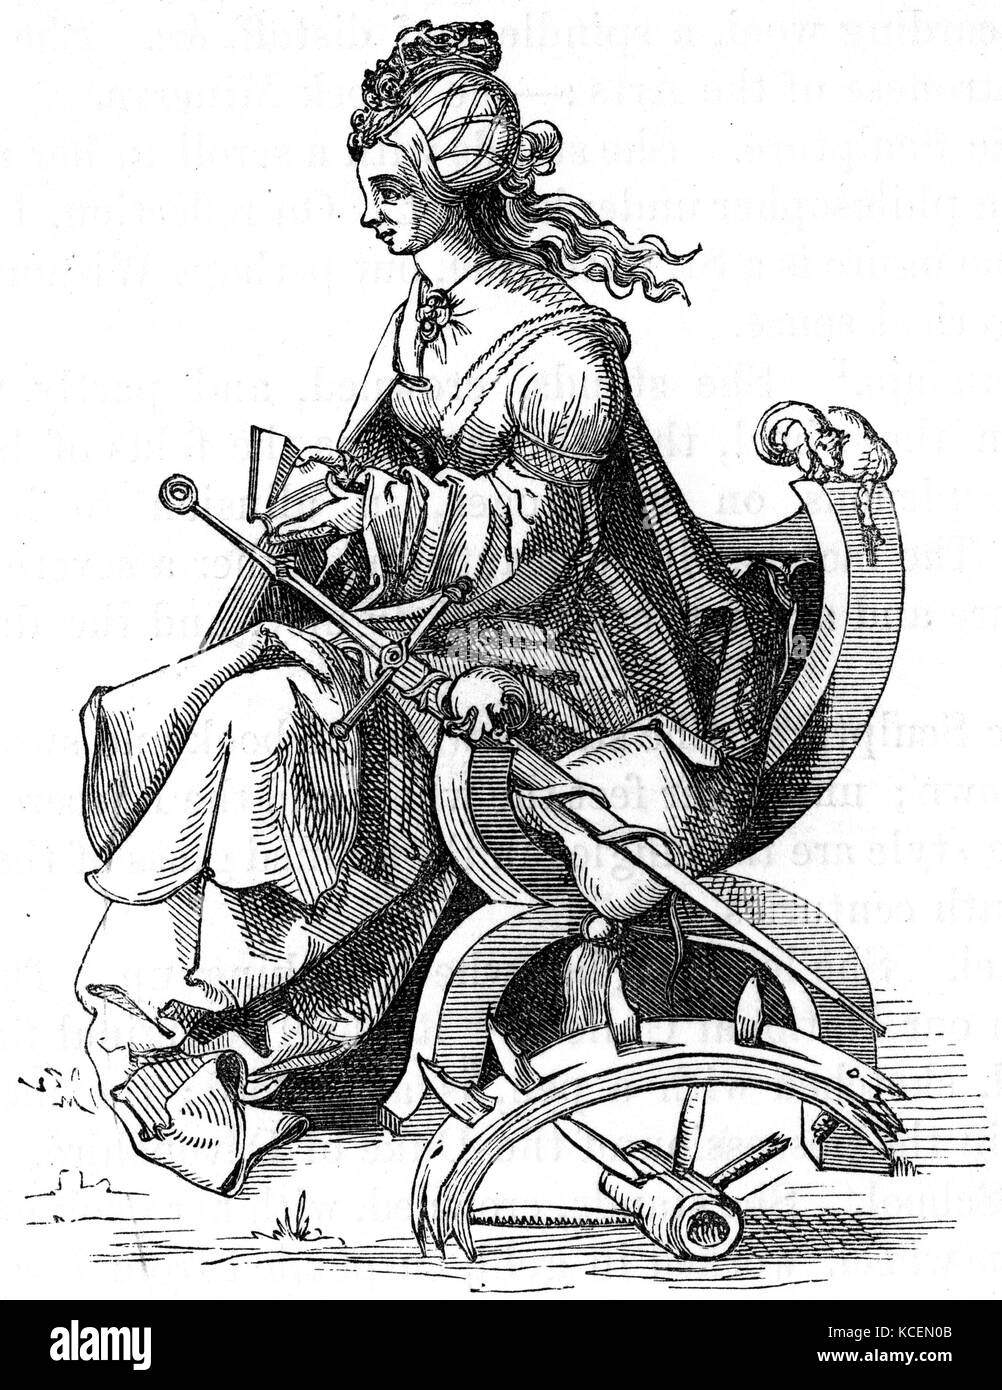 Albrecht Durer's interpretation of the Martyrdom of St Catherine of Alexandria, also known as Saint Catherine of the Wheel was, according to tradition, a Christian saint and virgin, who was martyred in the early 4th century at the hands of the pagan emperor Maxentius. Stock Photo